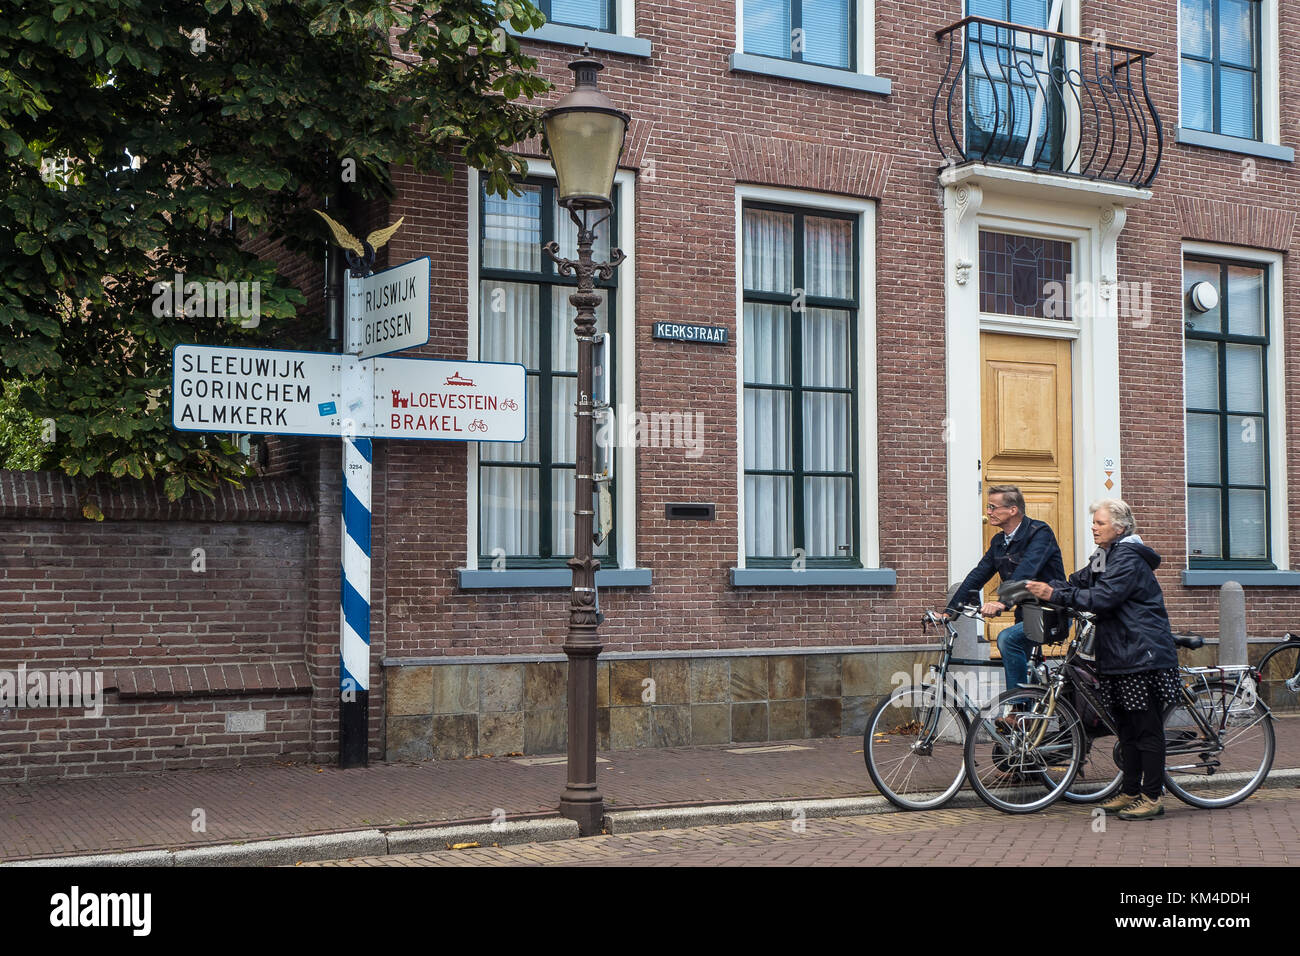 Two tourists on bicycles are pausing in front of an old signpost in Woudrichem, Holland. Stock Photo